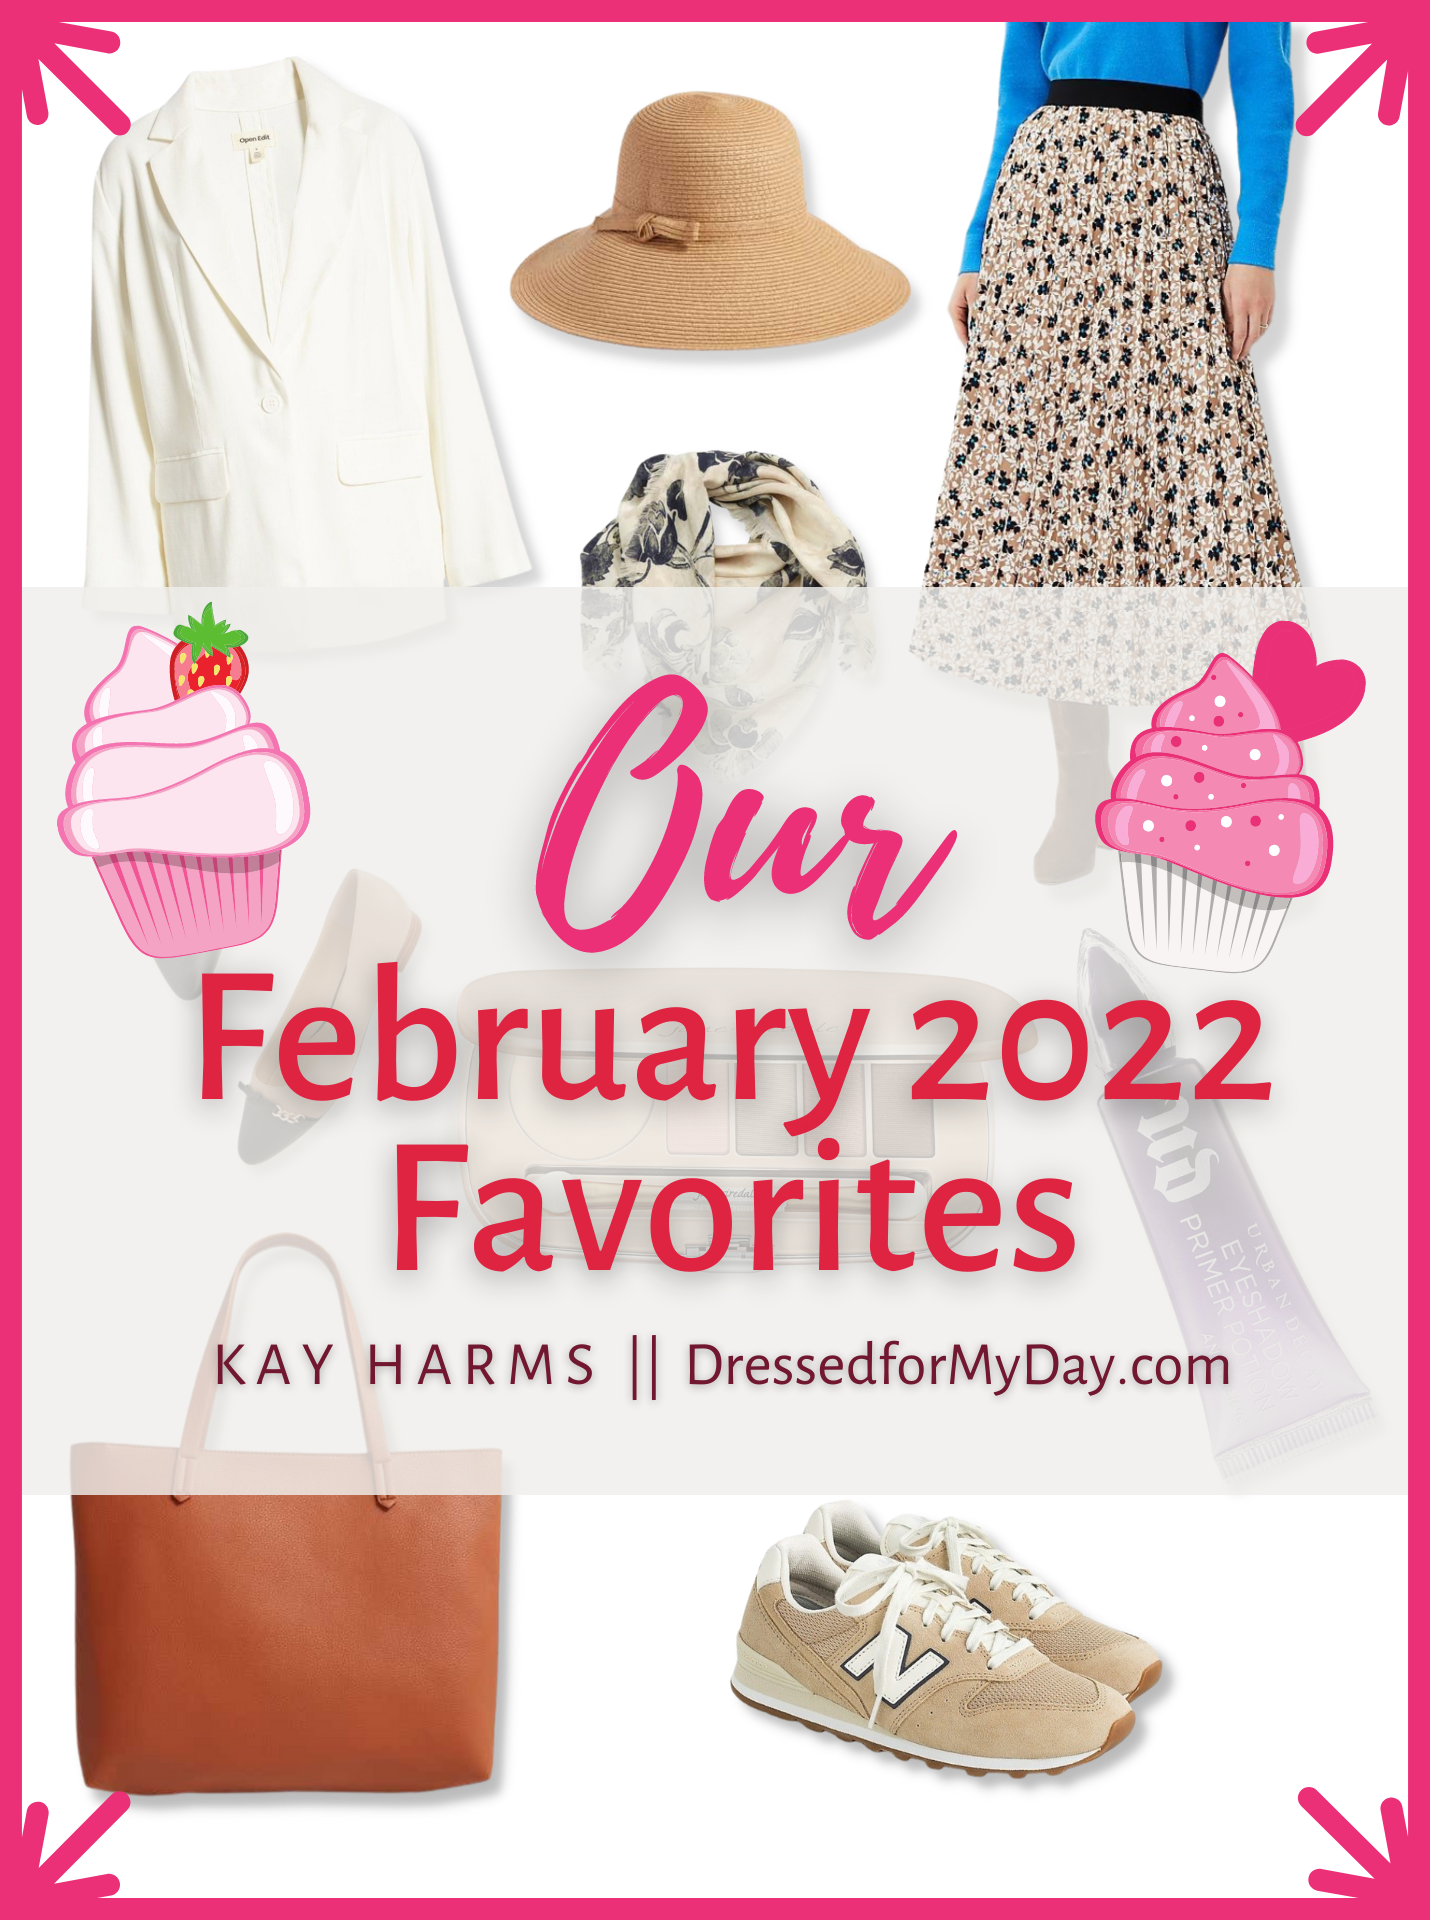 Our February 2022 Favorites